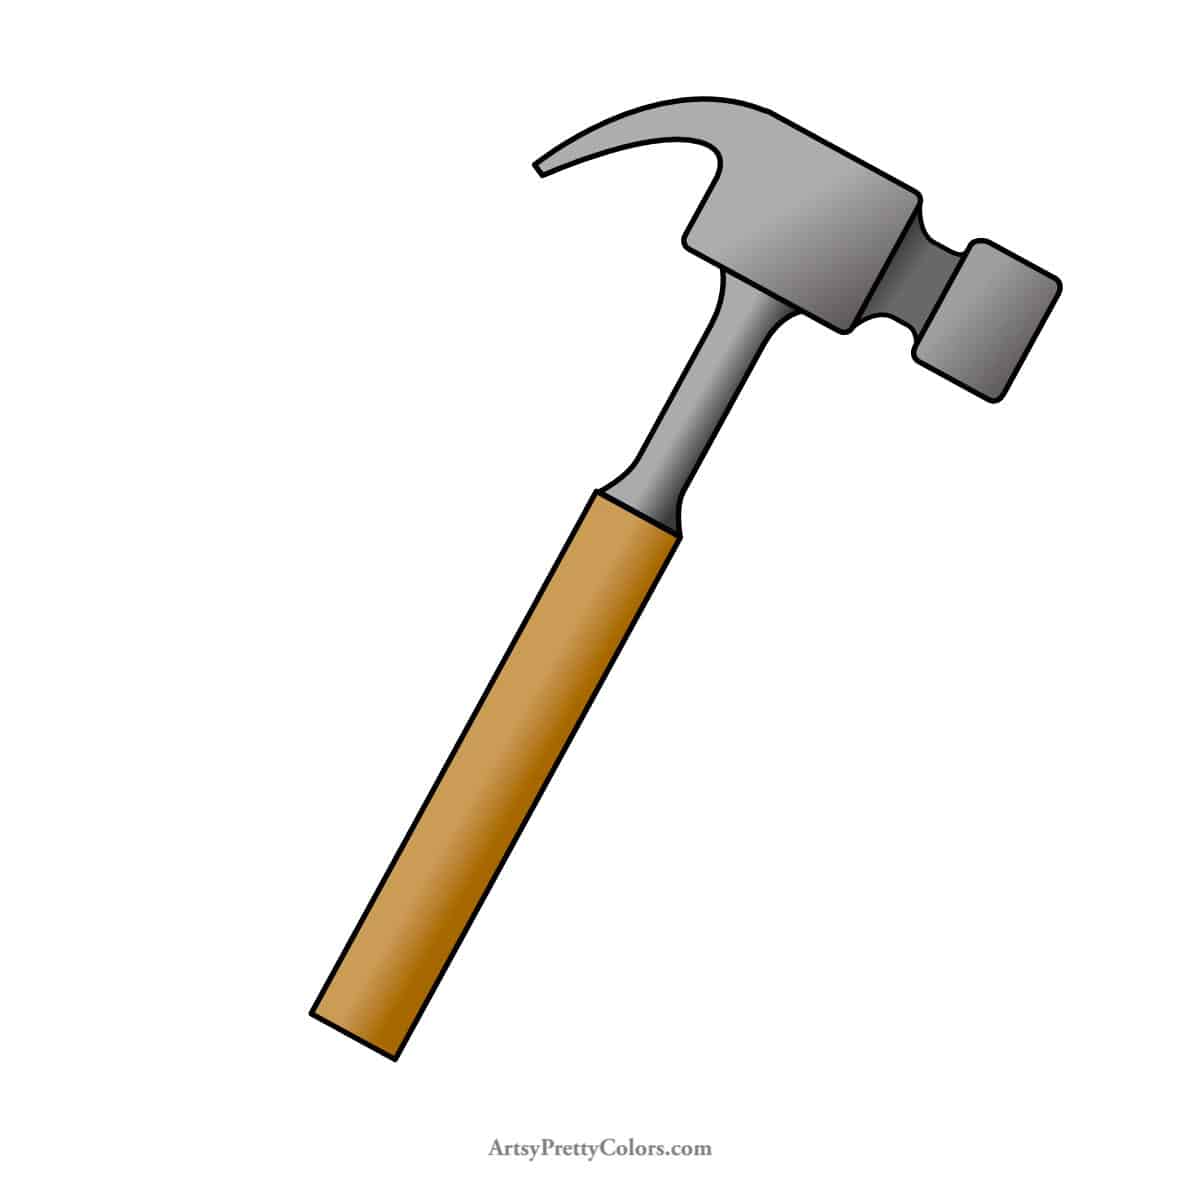 A finished, colored drawing of a hammer.